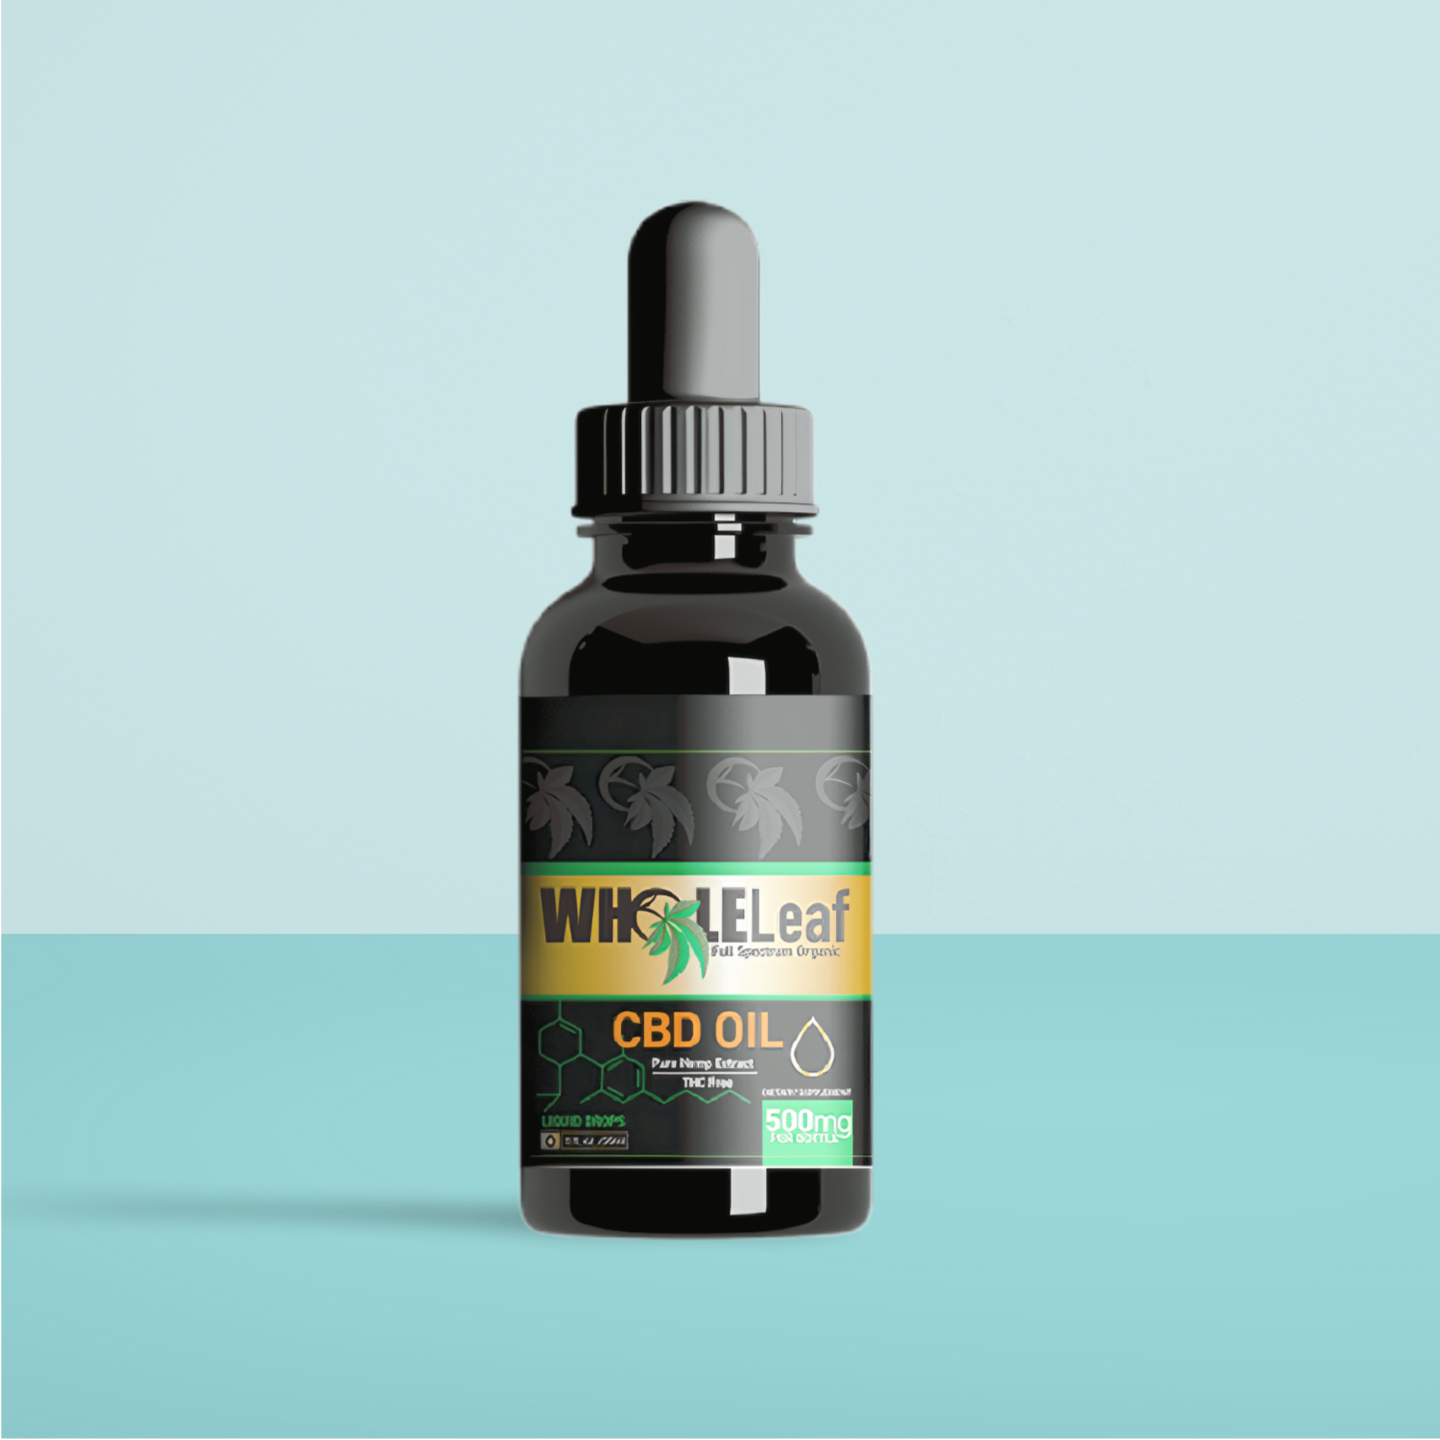 Wholeleaf CBD Oil Reviews – A Reliable Choice? Uncovering the Truth About This CBD Oil Product